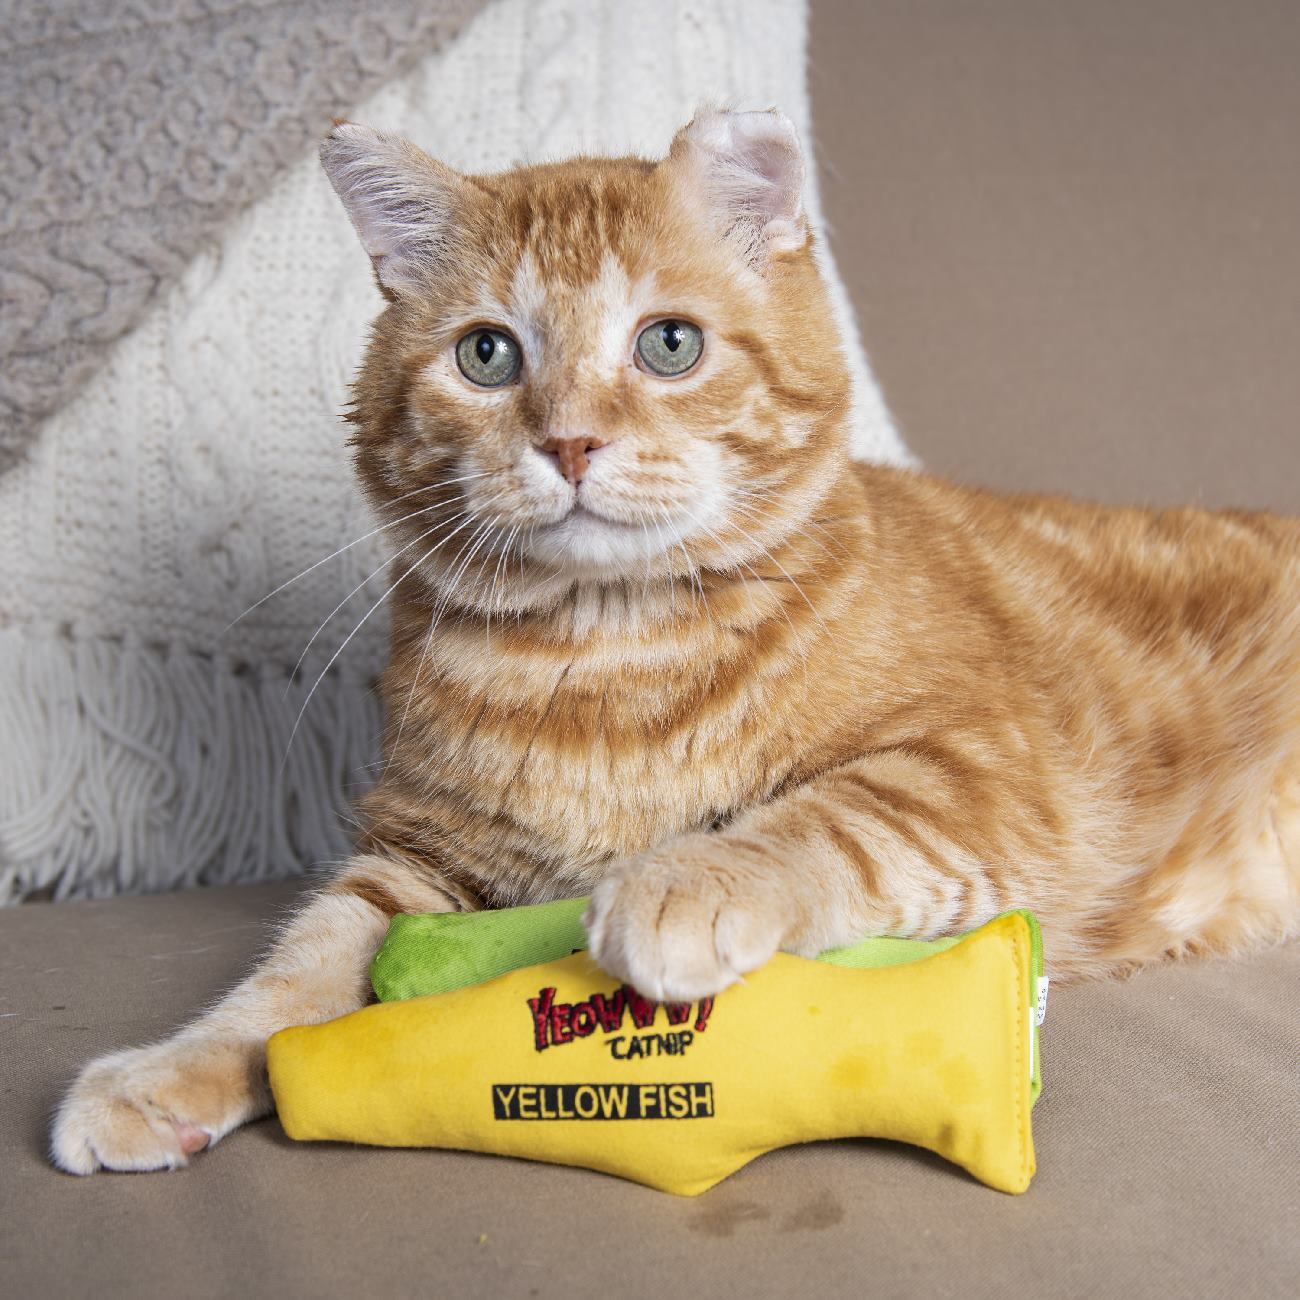 Yeowww! Cat Toys with Pure American Catnip - Yellow Fish image 0